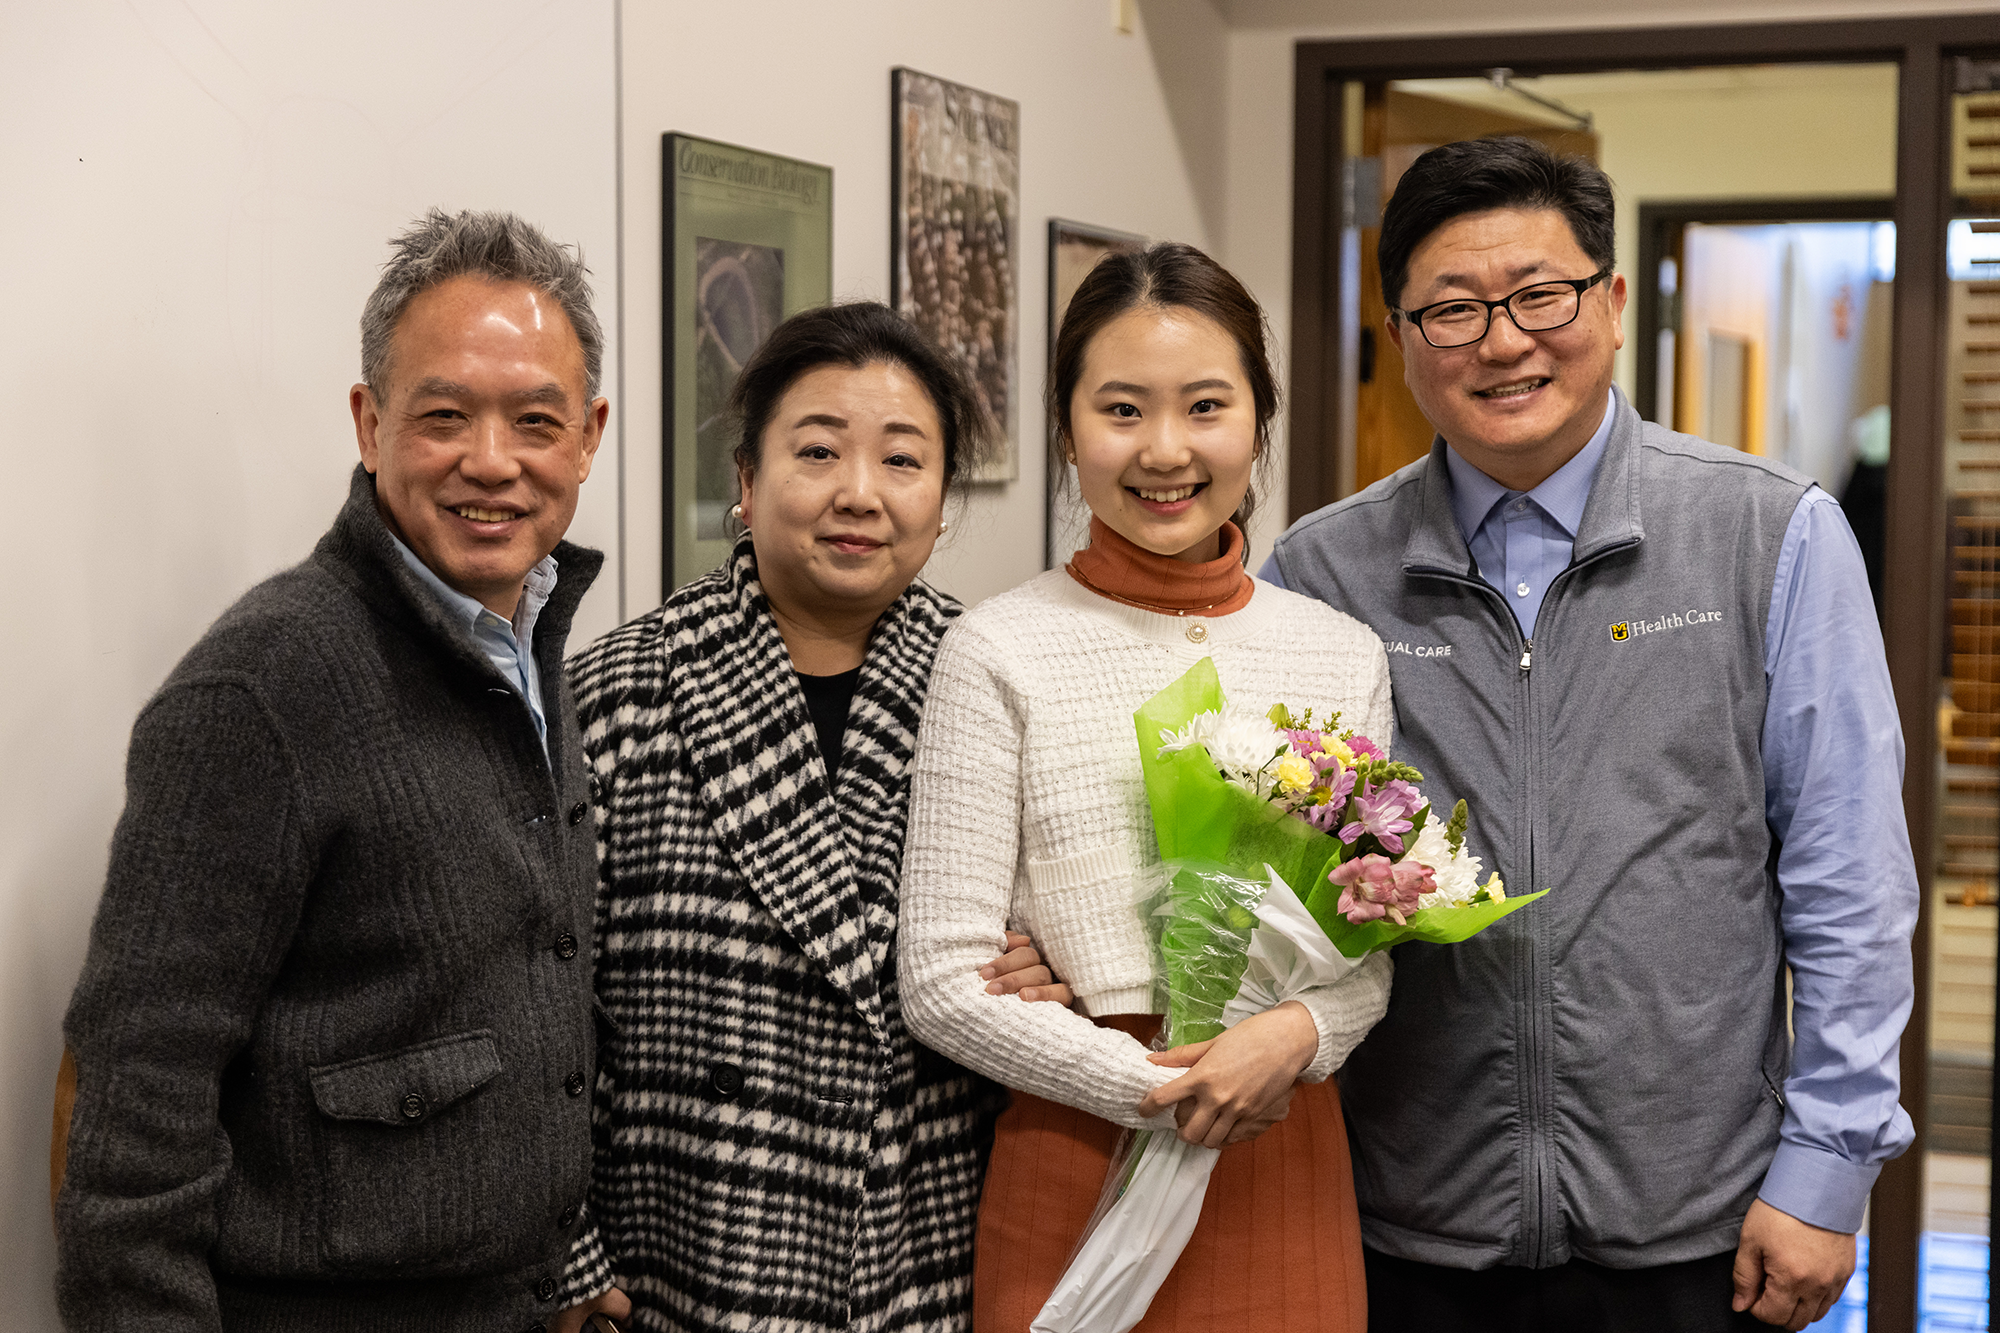 Jenny Park posing with her parents and mentor, Bing Zhang, a professor of biological sciences in the College of Arts and Science.